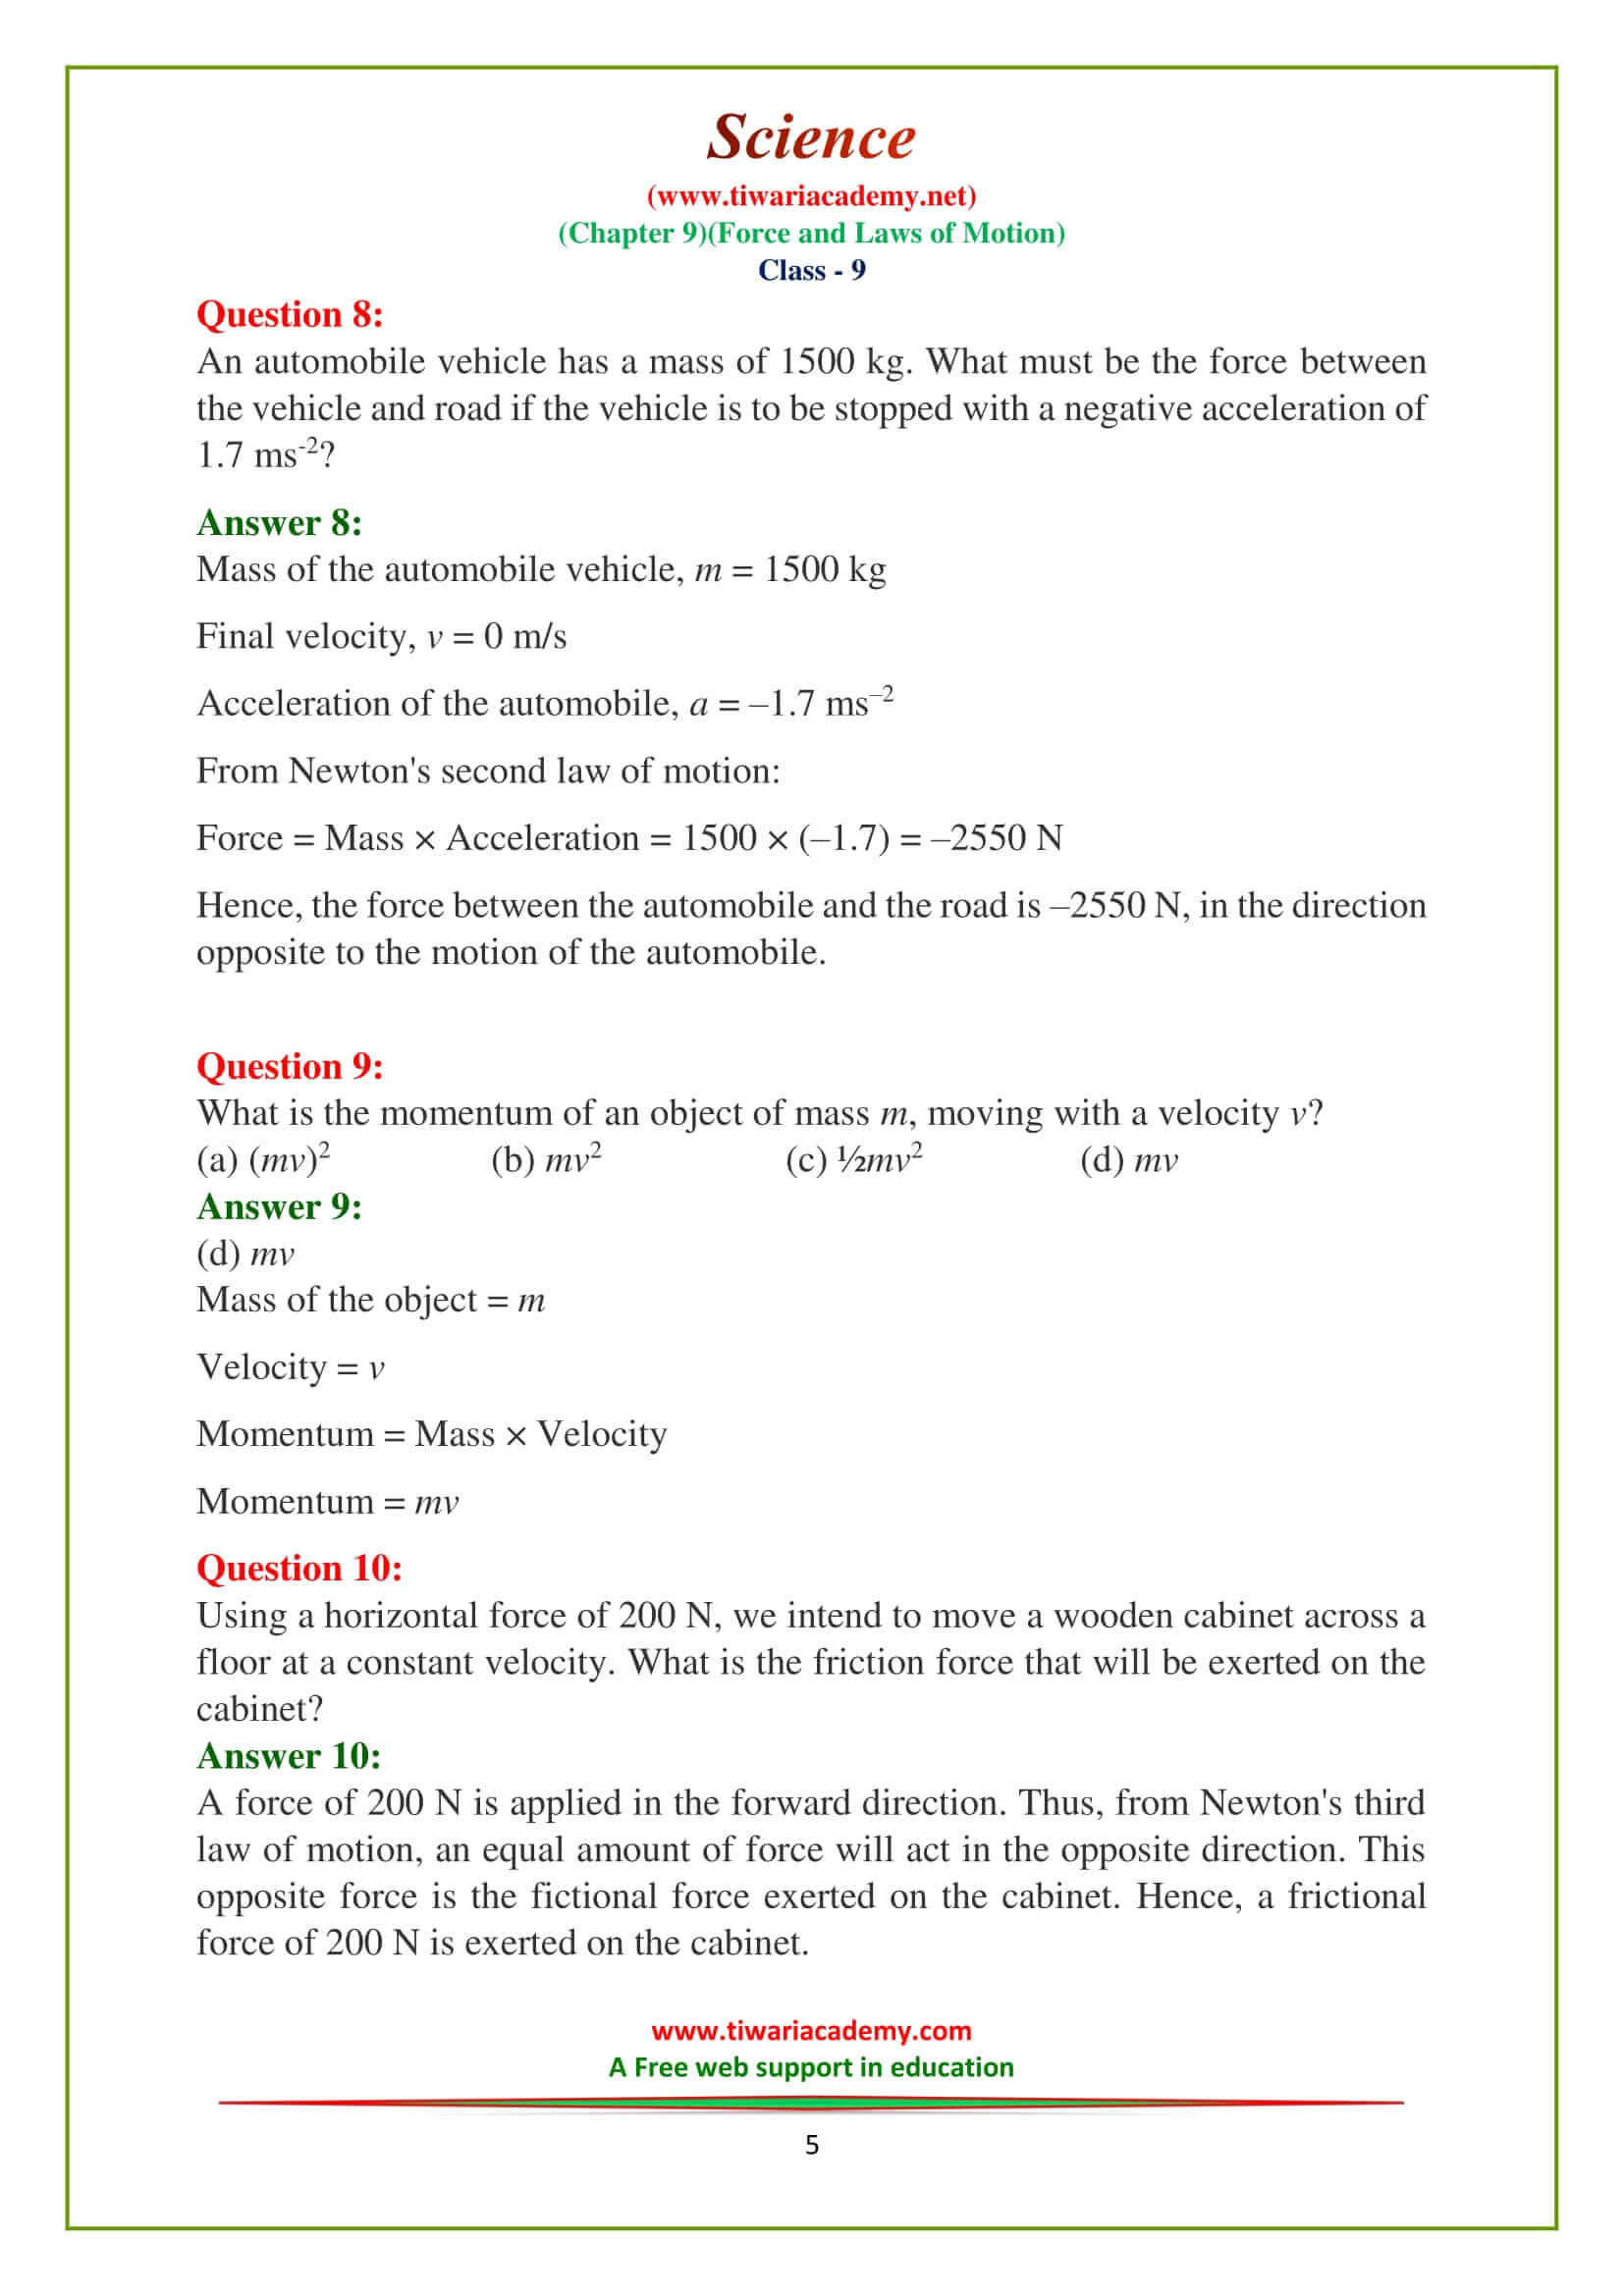 9 Science Chapter 9 force and laws of motion Exercises questions for mp board